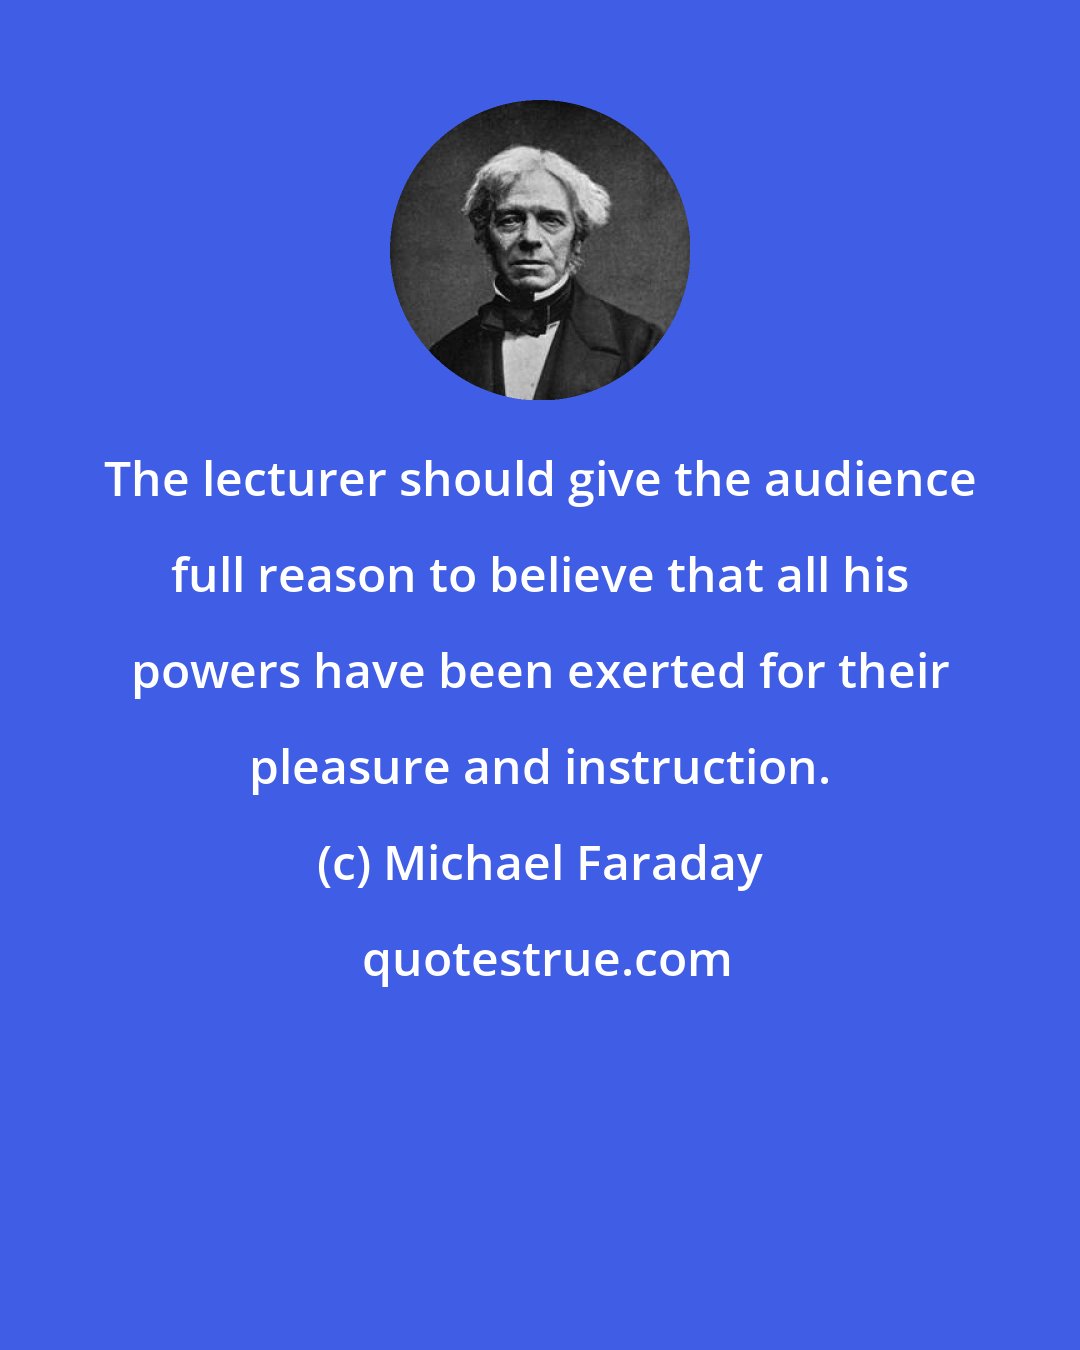 Michael Faraday: The lecturer should give the audience full reason to believe that all his powers have been exerted for their pleasure and instruction.